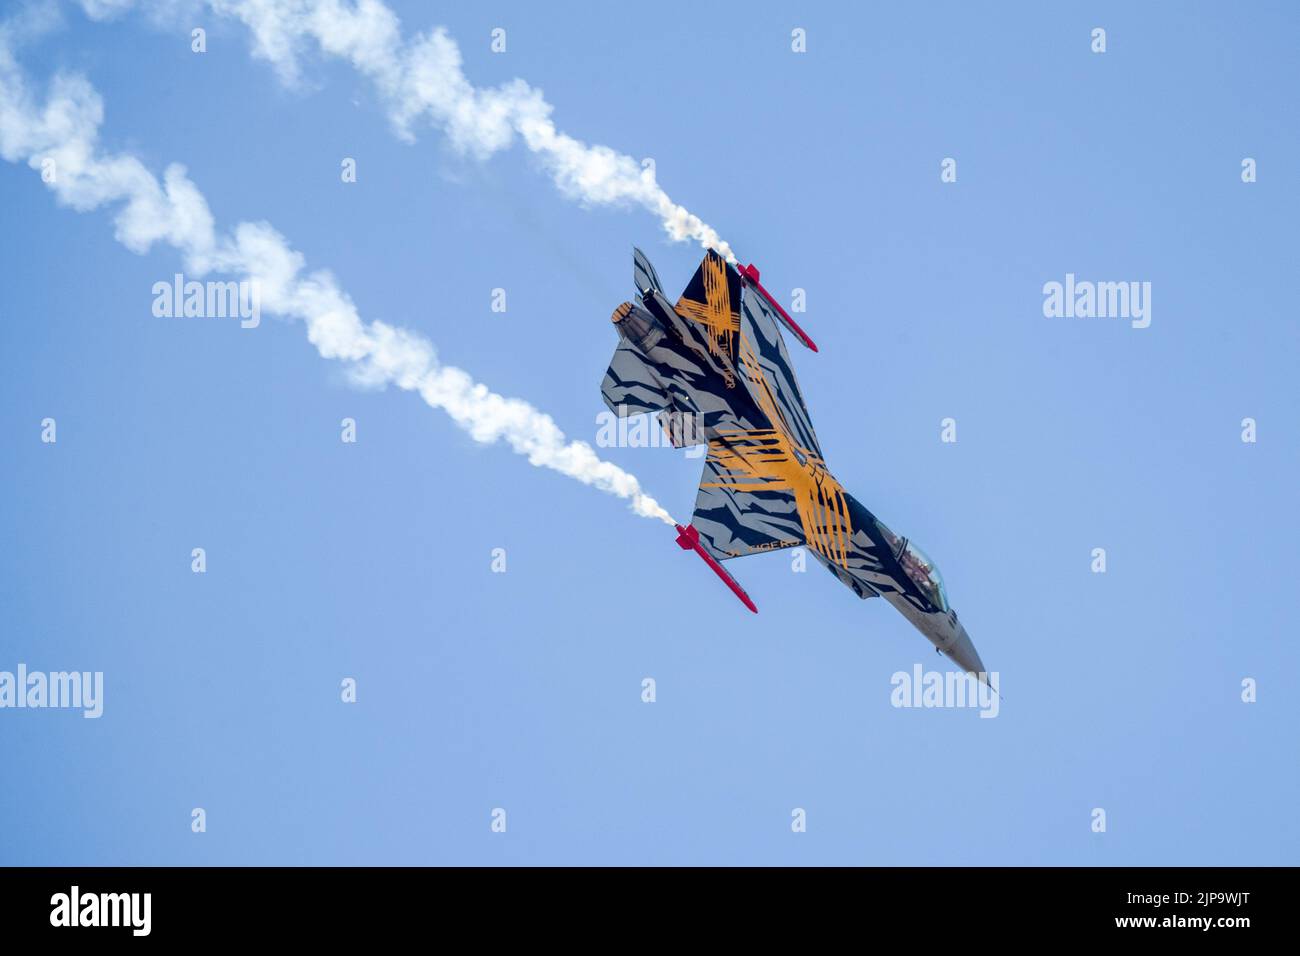 Belgian Air Component (BAC) F-16 Fighting Falcon airborne at the Royal International Air Tattoo 2022 Stock Photo